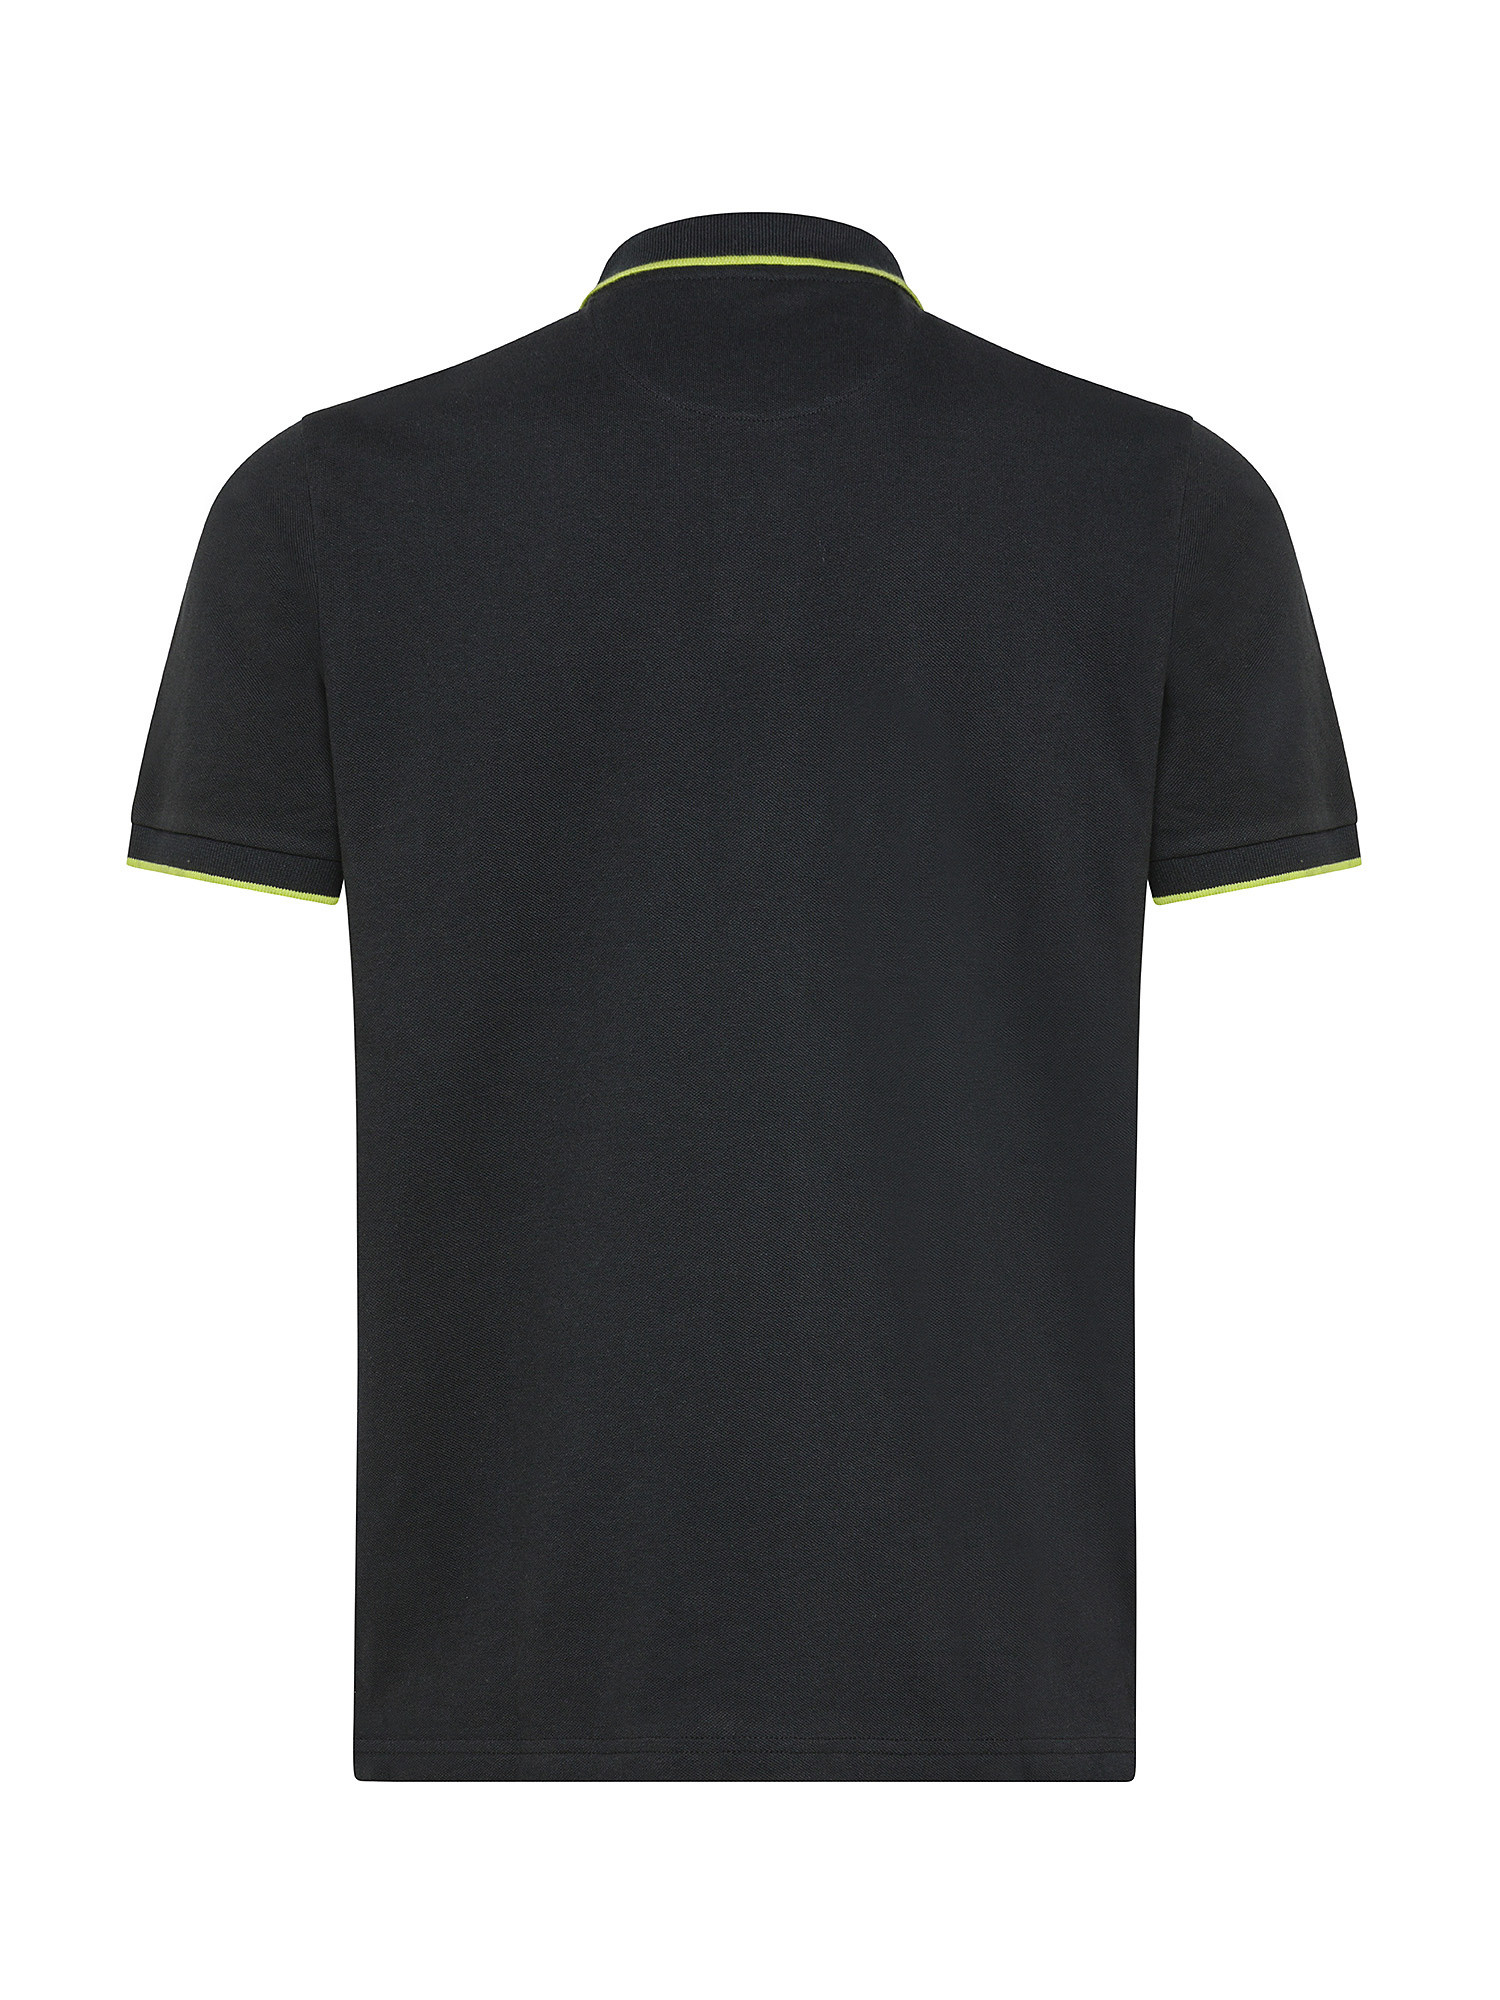 North Sails - Organic cotton piqué polo shirt with micrologo, Dark Blue, large image number 1